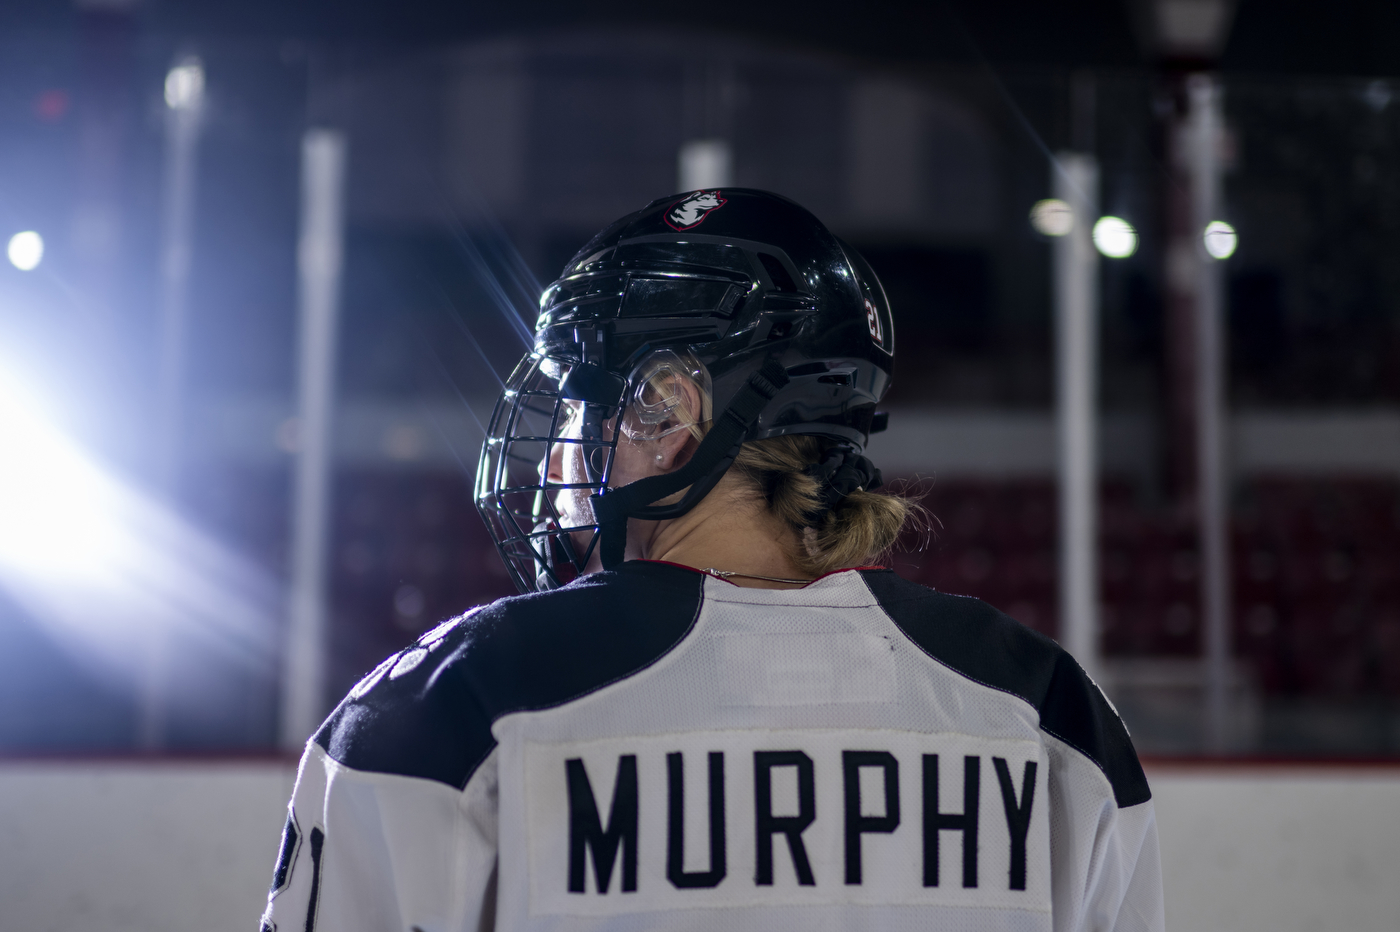 A player on the Northeastern women’s hockey team shows the back of their jersey with black text: 'Murphy.'